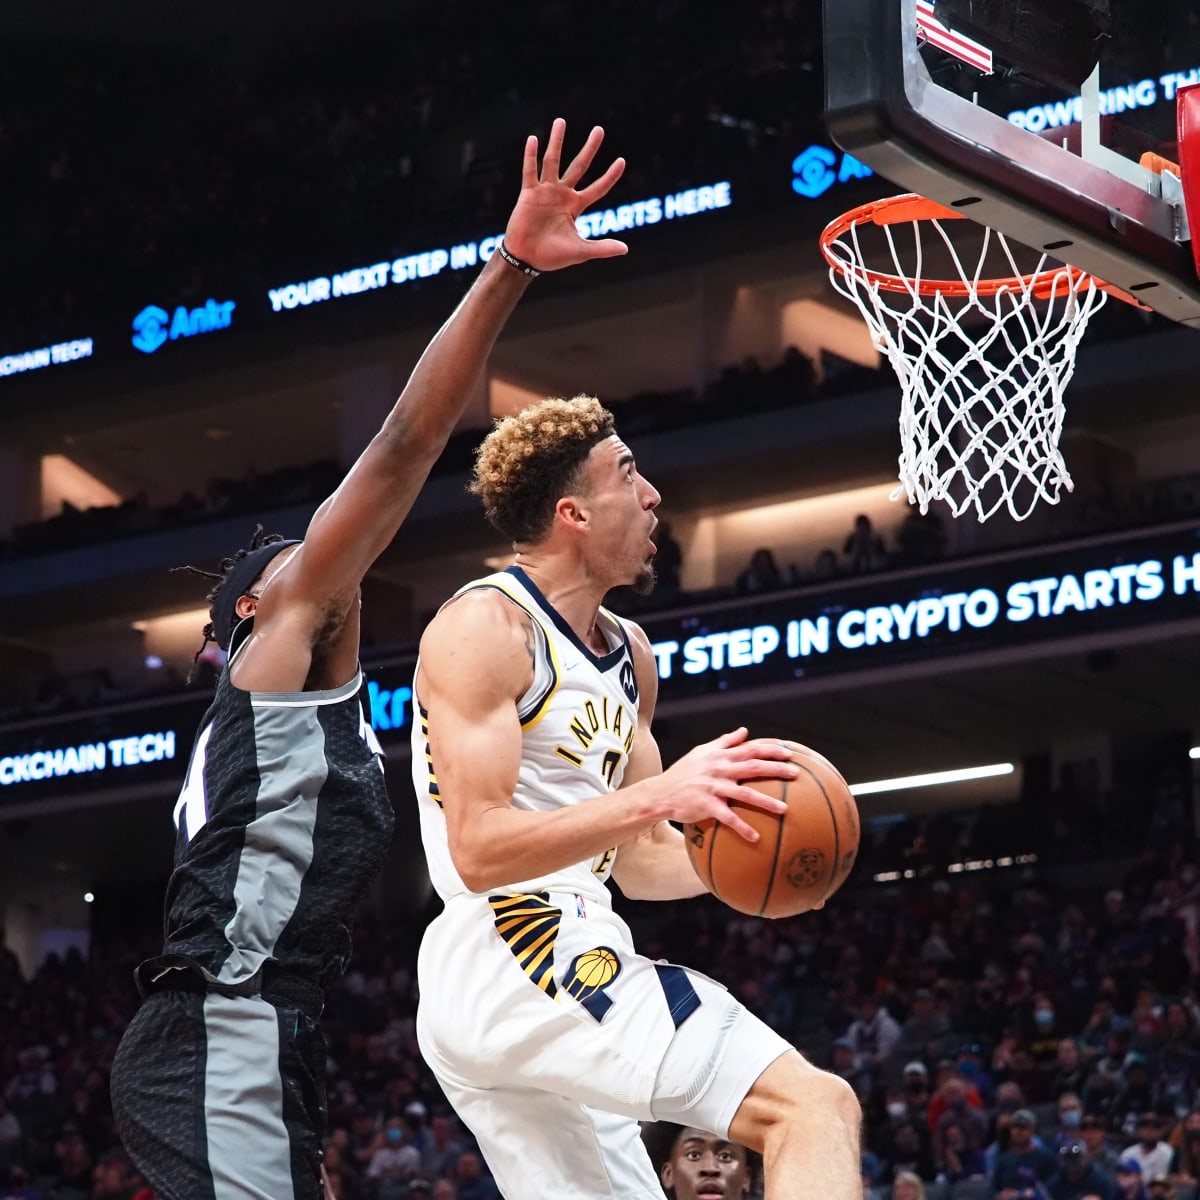 Indiana Pacers: Reviewing the Chris Duarte experience and reported trade